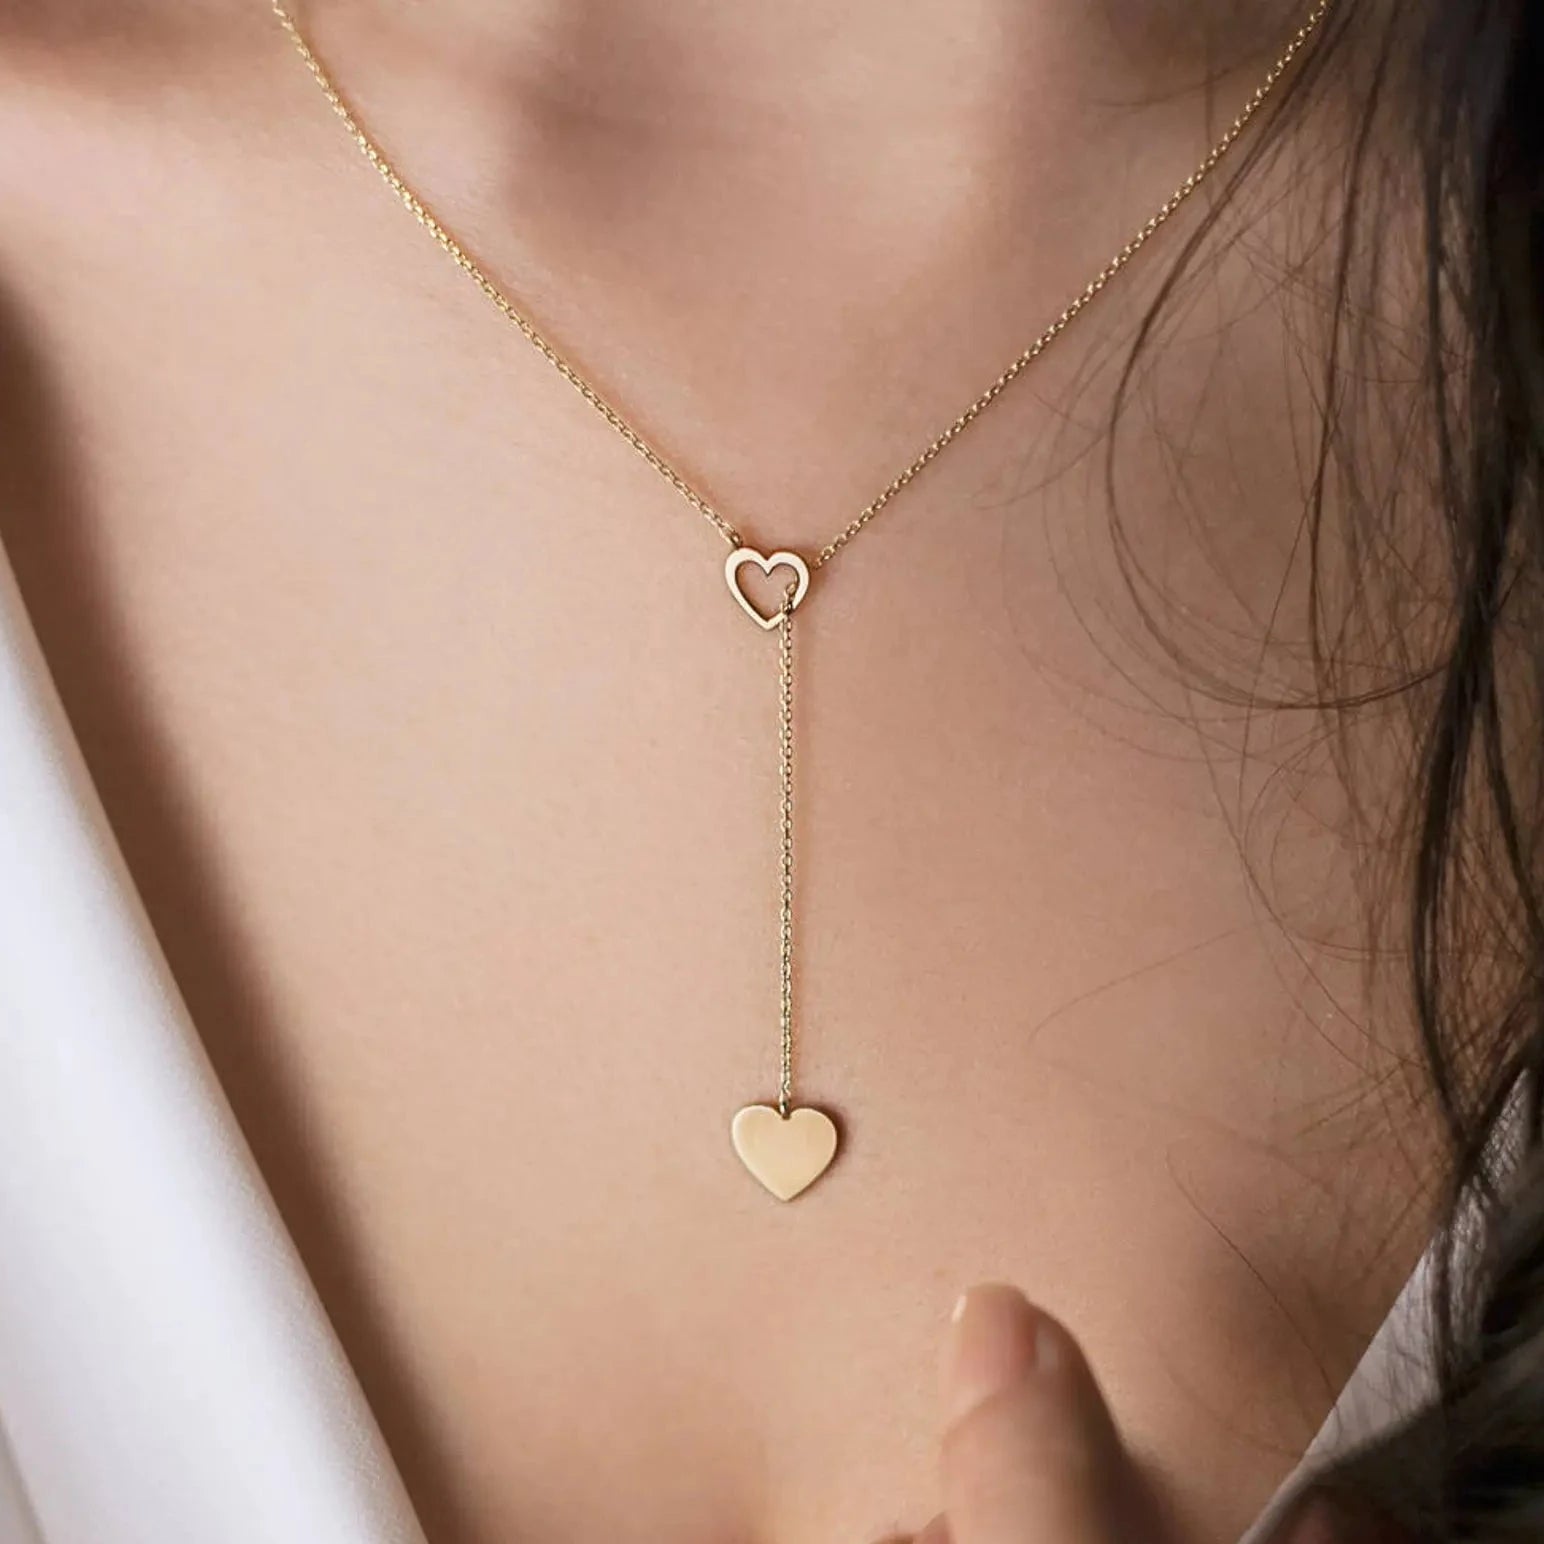 18 Carat Gold Heart Drop Necklace - Burst of Arabia - Exquisite Arabic Jewelry Collection for Her.